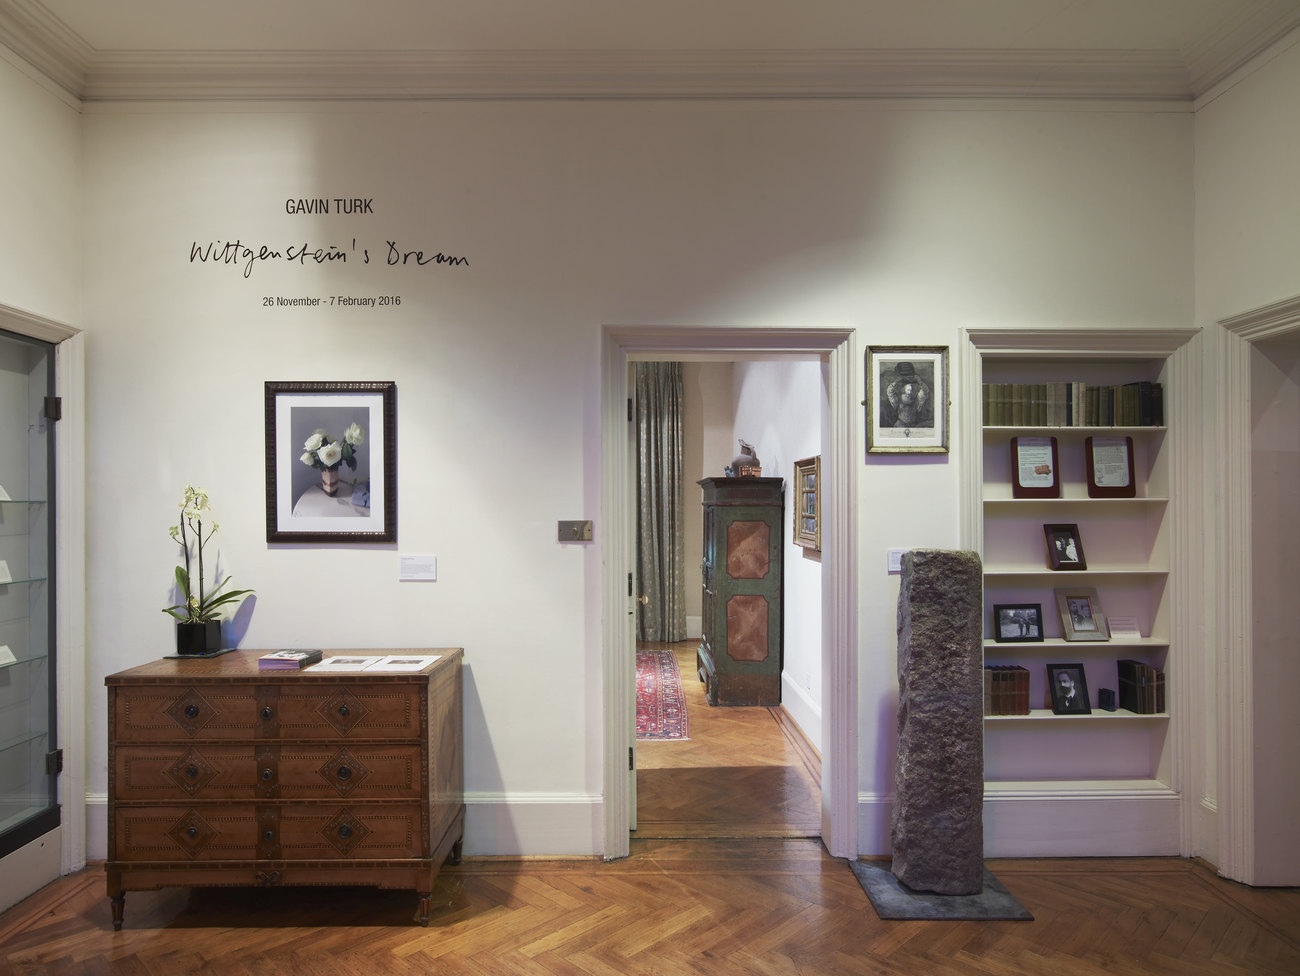 A room in The Freud Museum. There is a wooden set of drawers with a photograph of white flowers hung above to the left of a doorway. On the right of the doorway is a long stone column, roughly half the height of the doorway  